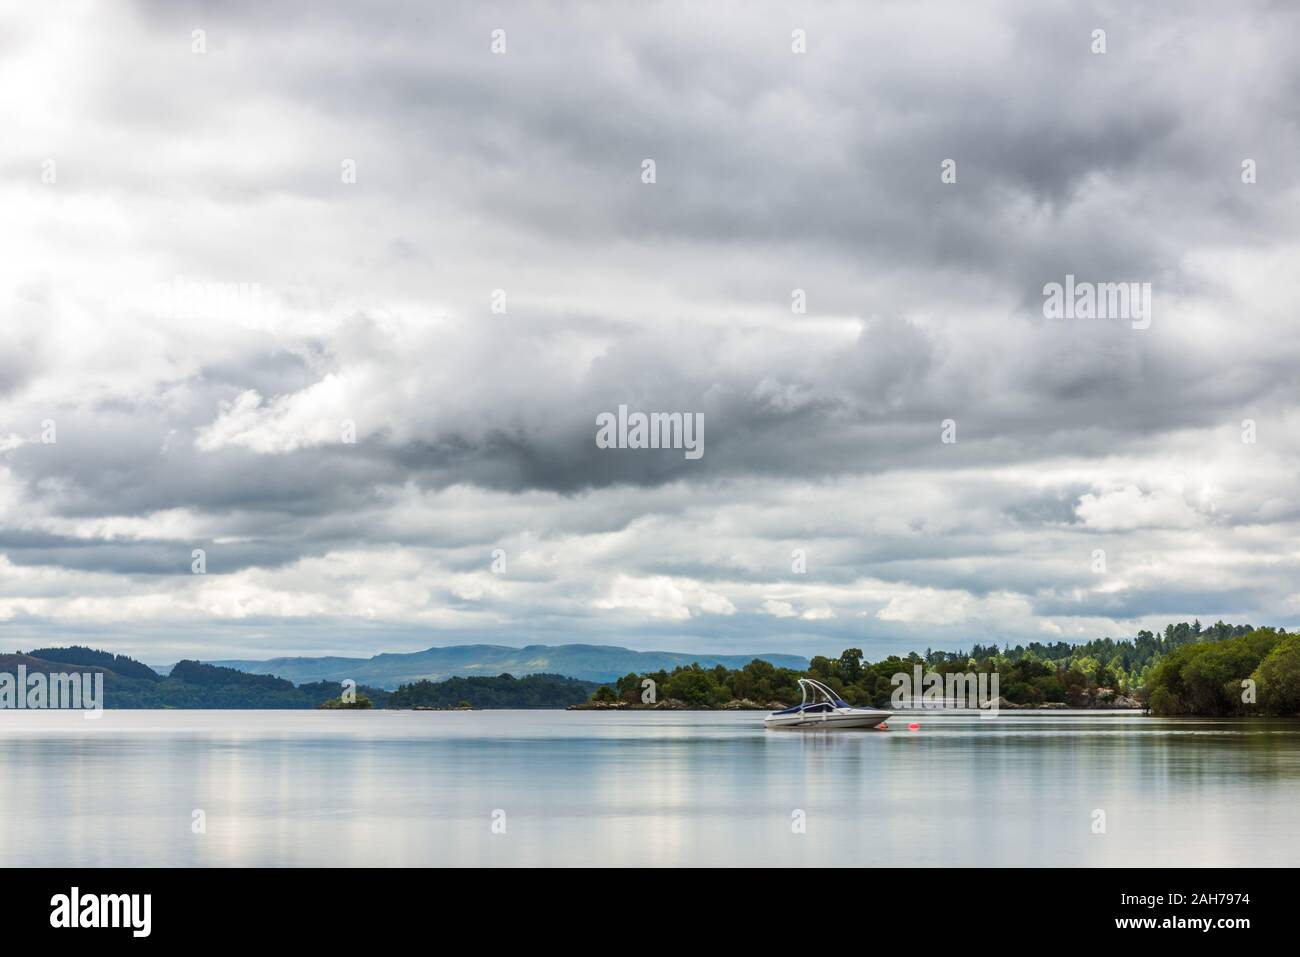 A scottish lake surrounded by trees and vegetation, with a motorboat moored in the middle and distant mountains under a cloudy sky Stock Photo